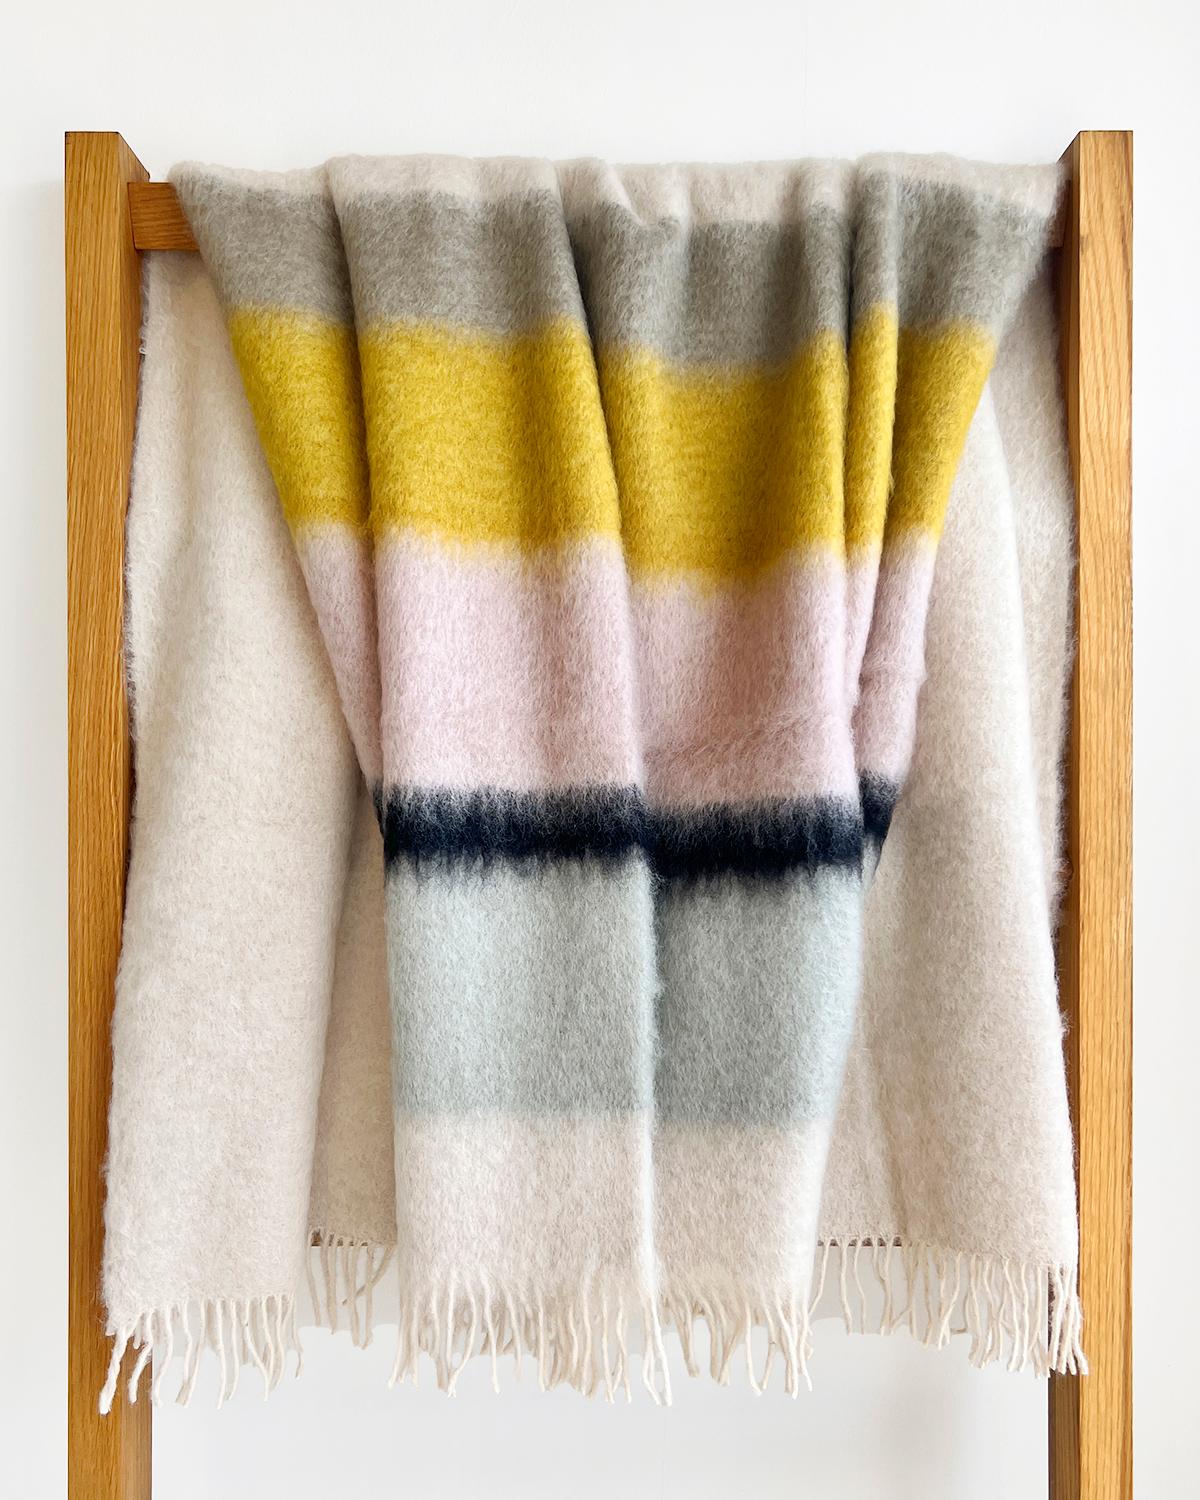 This Color Block Mohair Blanket Throw is the perfect way to add a cozy, pastel-hued touch to any room in the house. Its handmade Spanish construction ensures superior quality, while its fuzzy, warm materials are sure to bring you comfort and add a